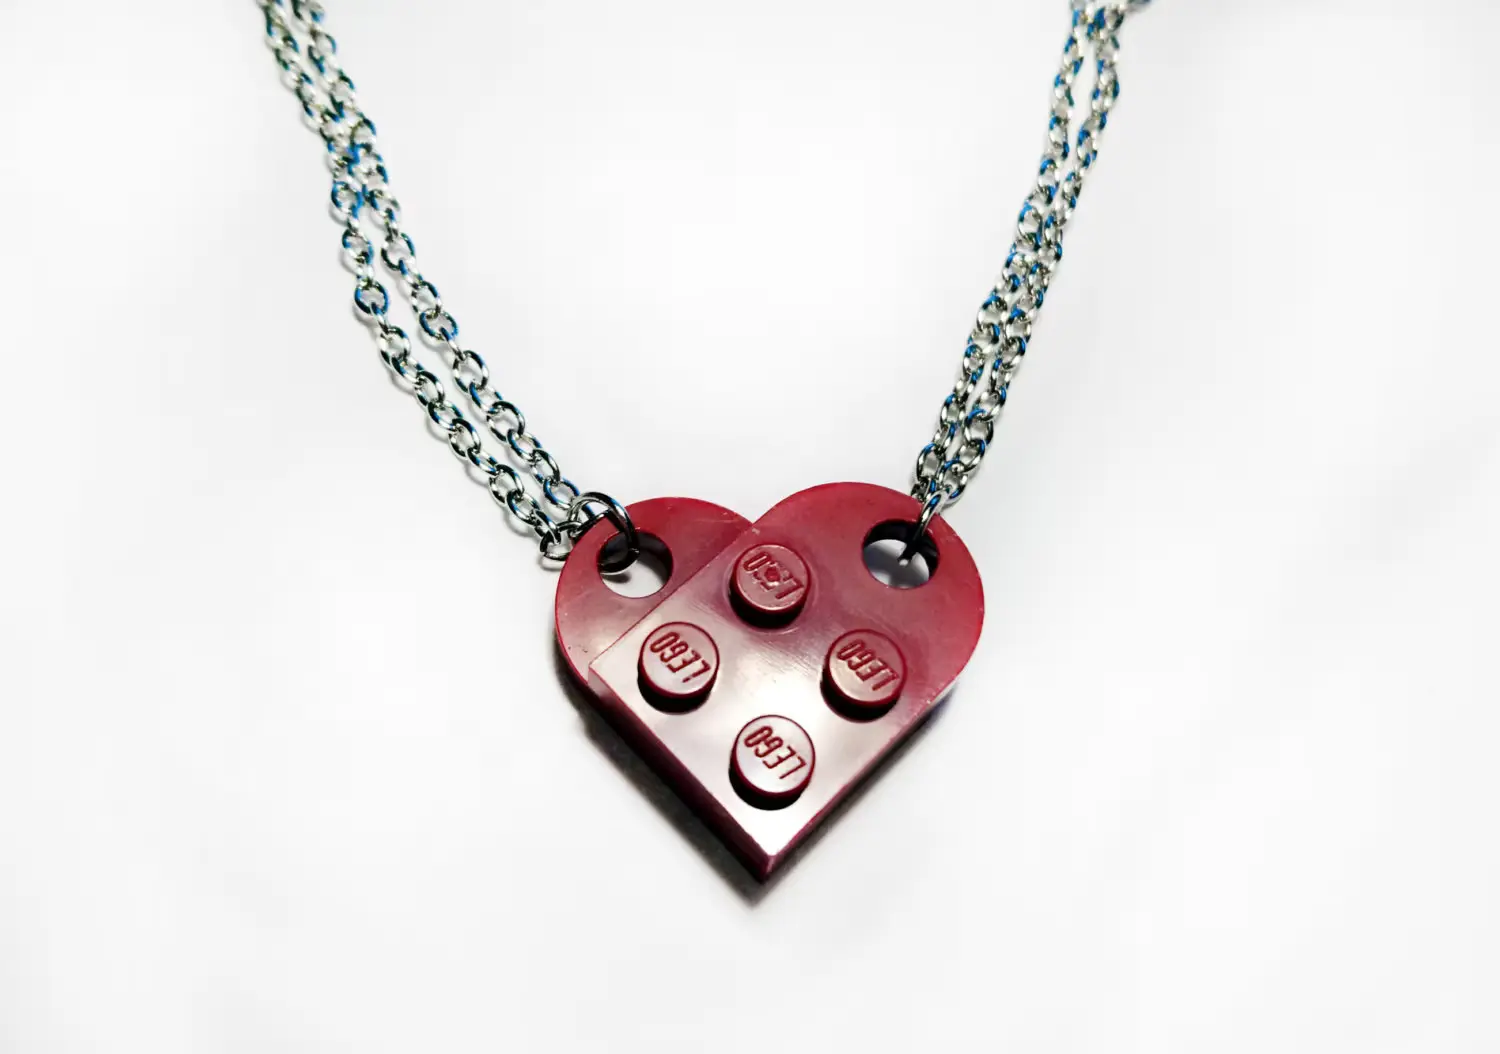 Lego Heart Necklace Gift